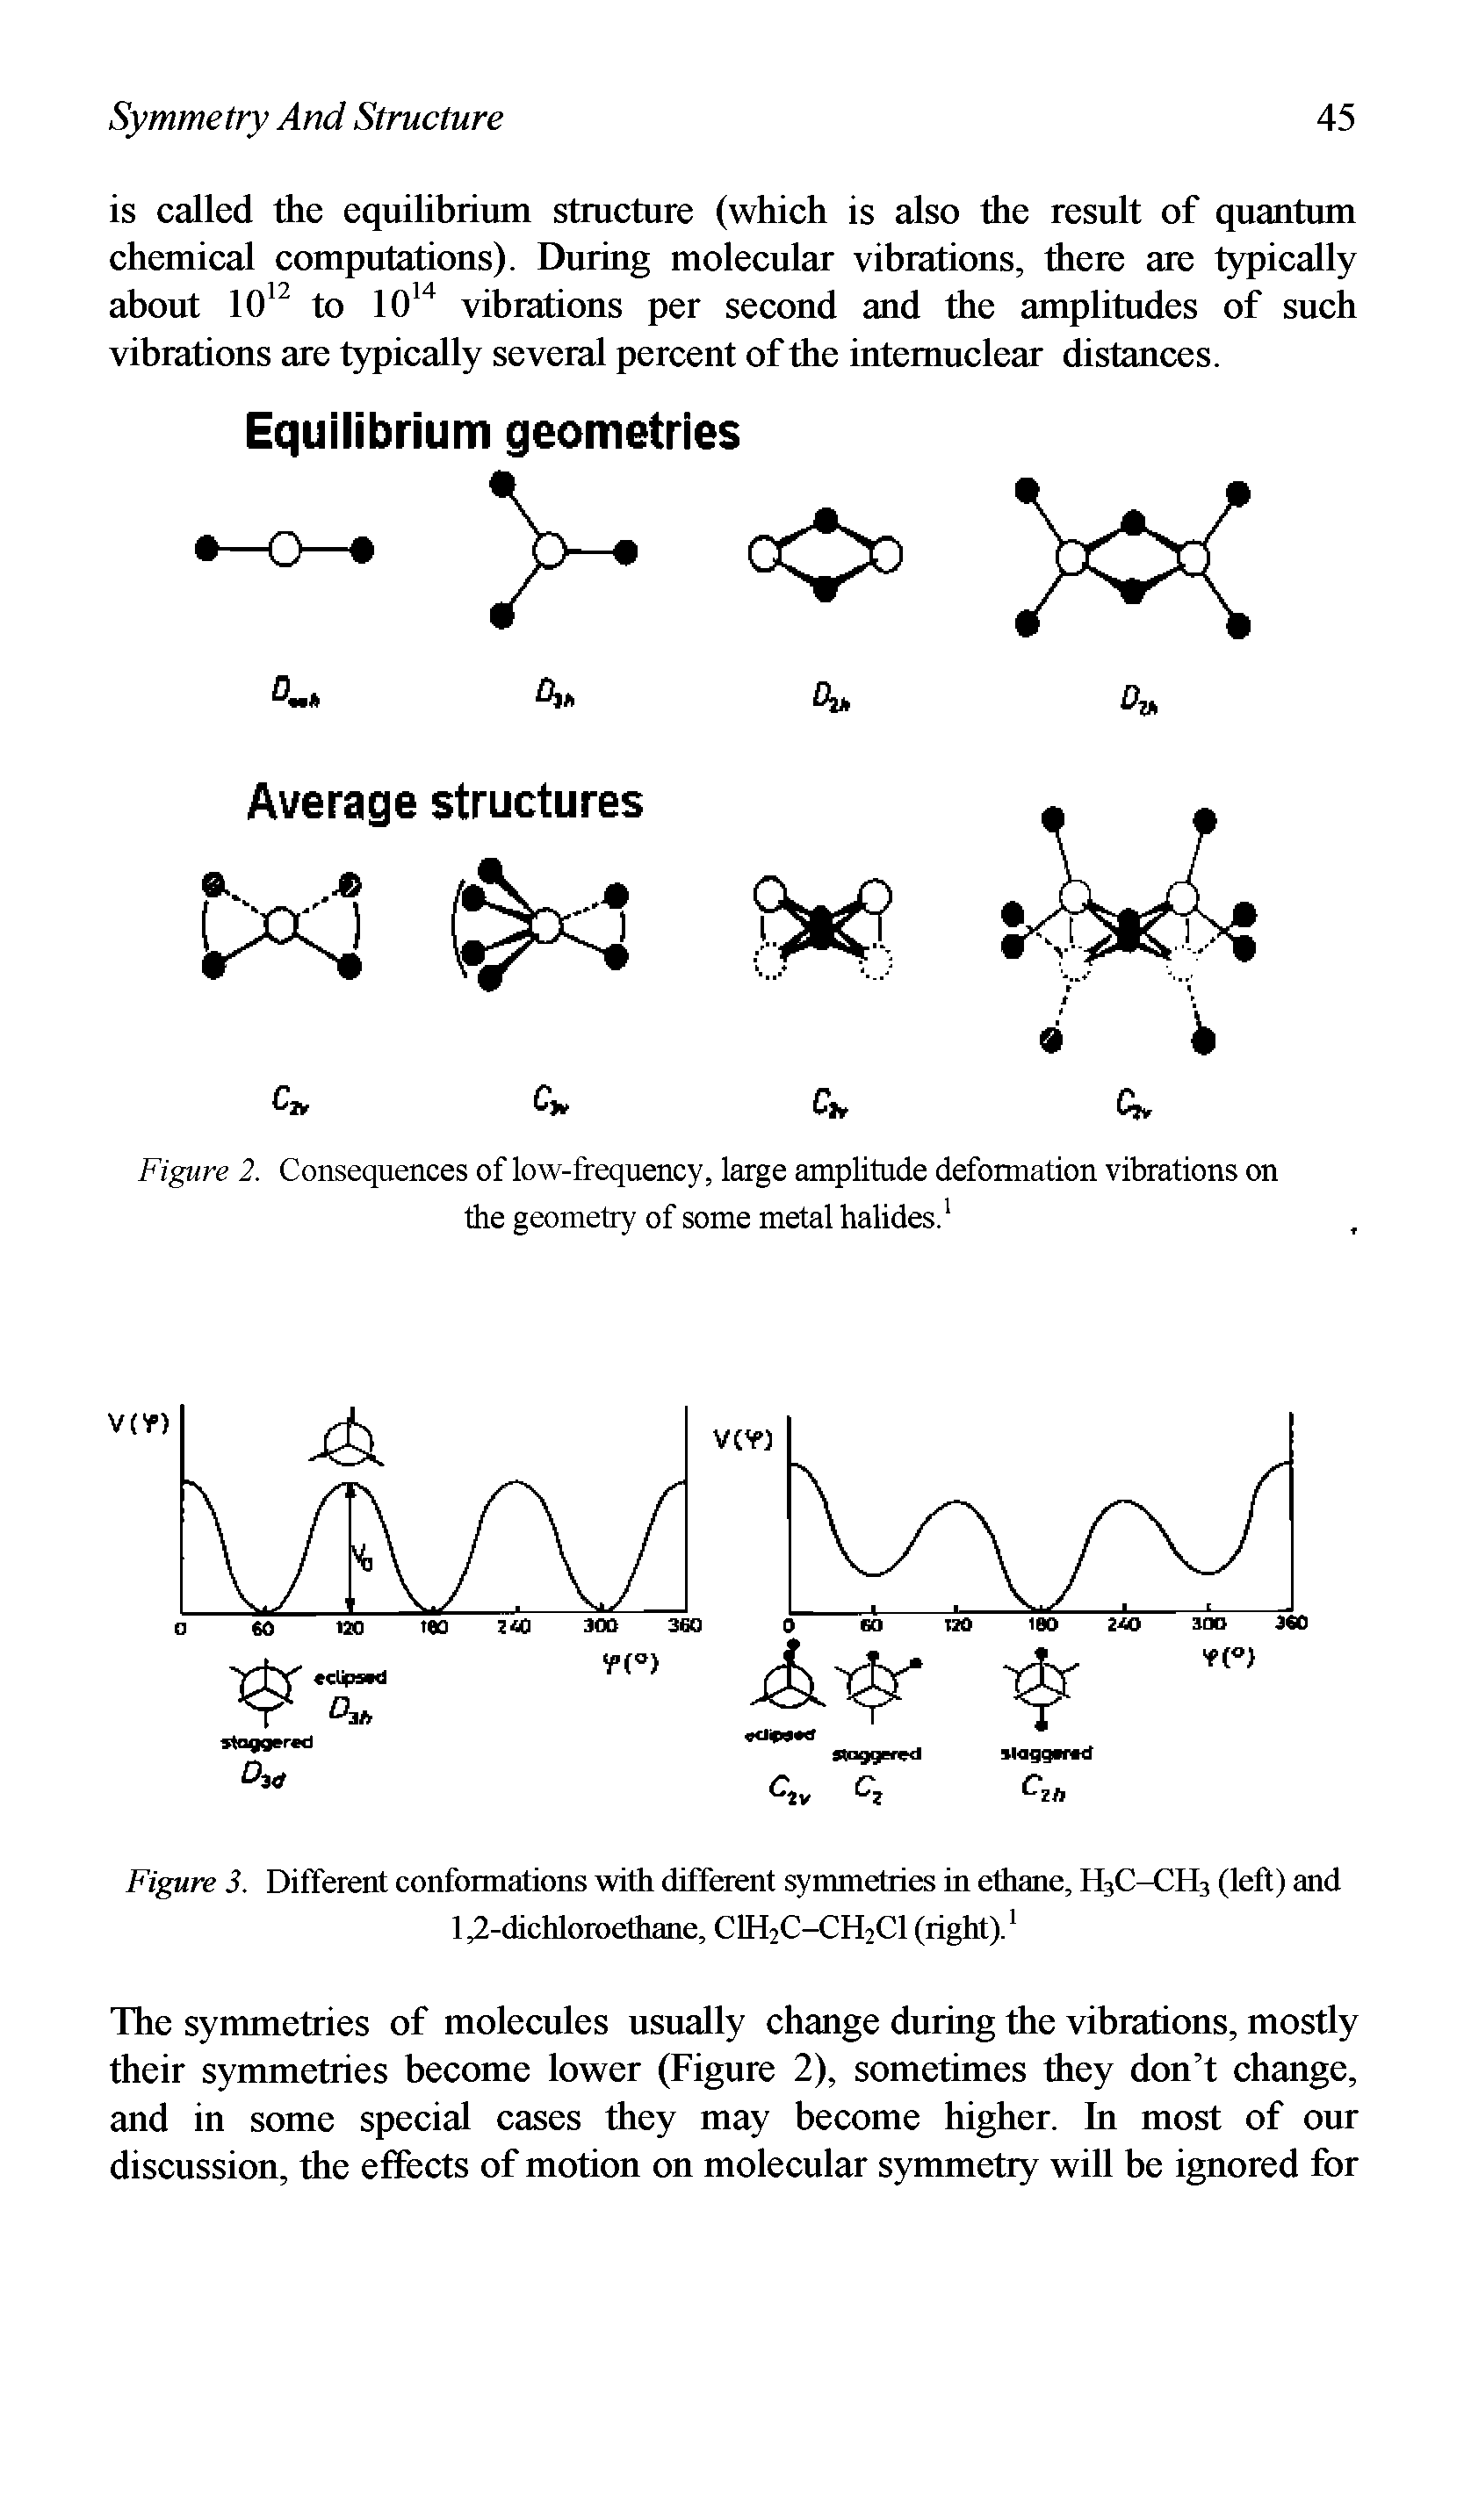 Figure 3. Different conformations with different symmetries in ethane, H3C-CH3 (left) and 1,2-dichloroethane, CIH2C-CH2CI (right). ...